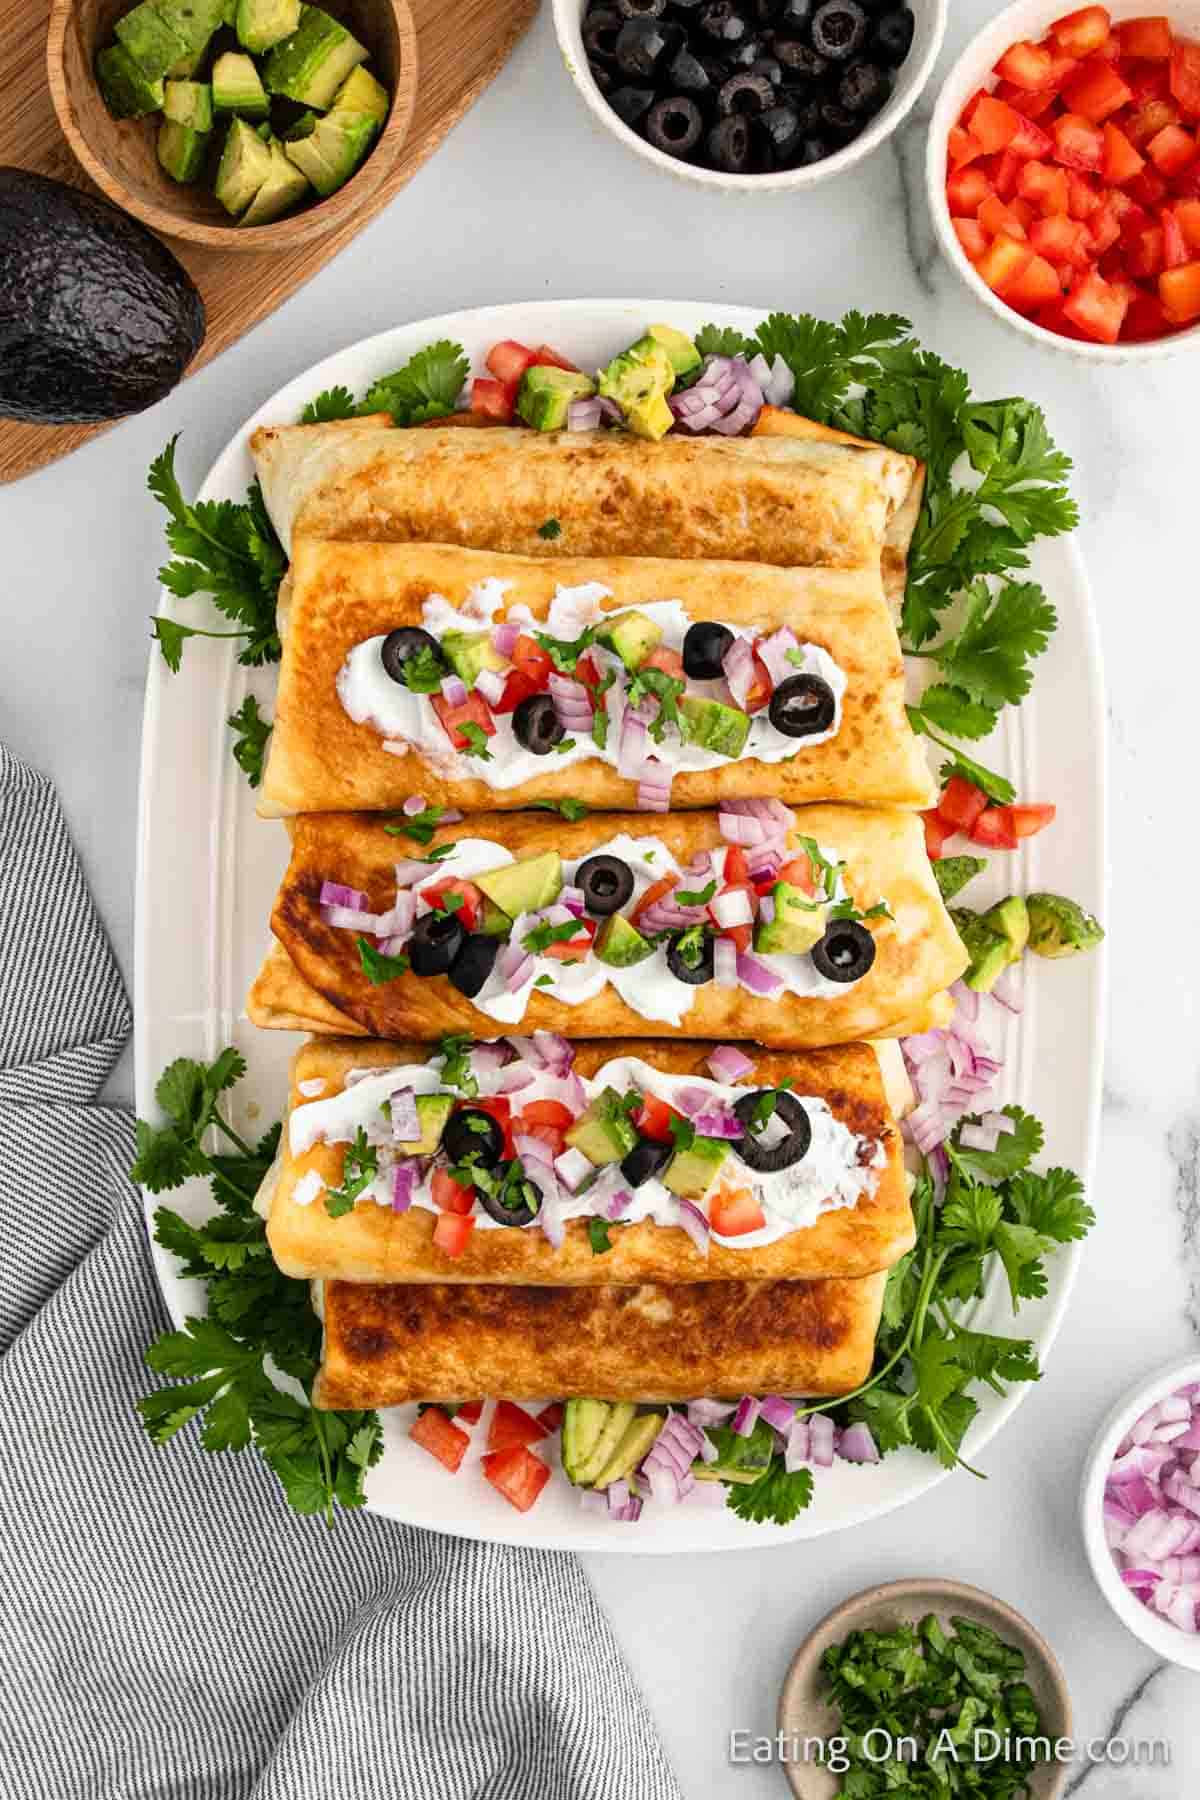 A white plate with three golden-brown beef chimichangas topped with sour cream, diced tomatoes, red onions, black olives, and chopped cilantro. The plate is surrounded by bowls of black olives, diced red peppers, and avocado chunks, with fresh parsley as garnish.